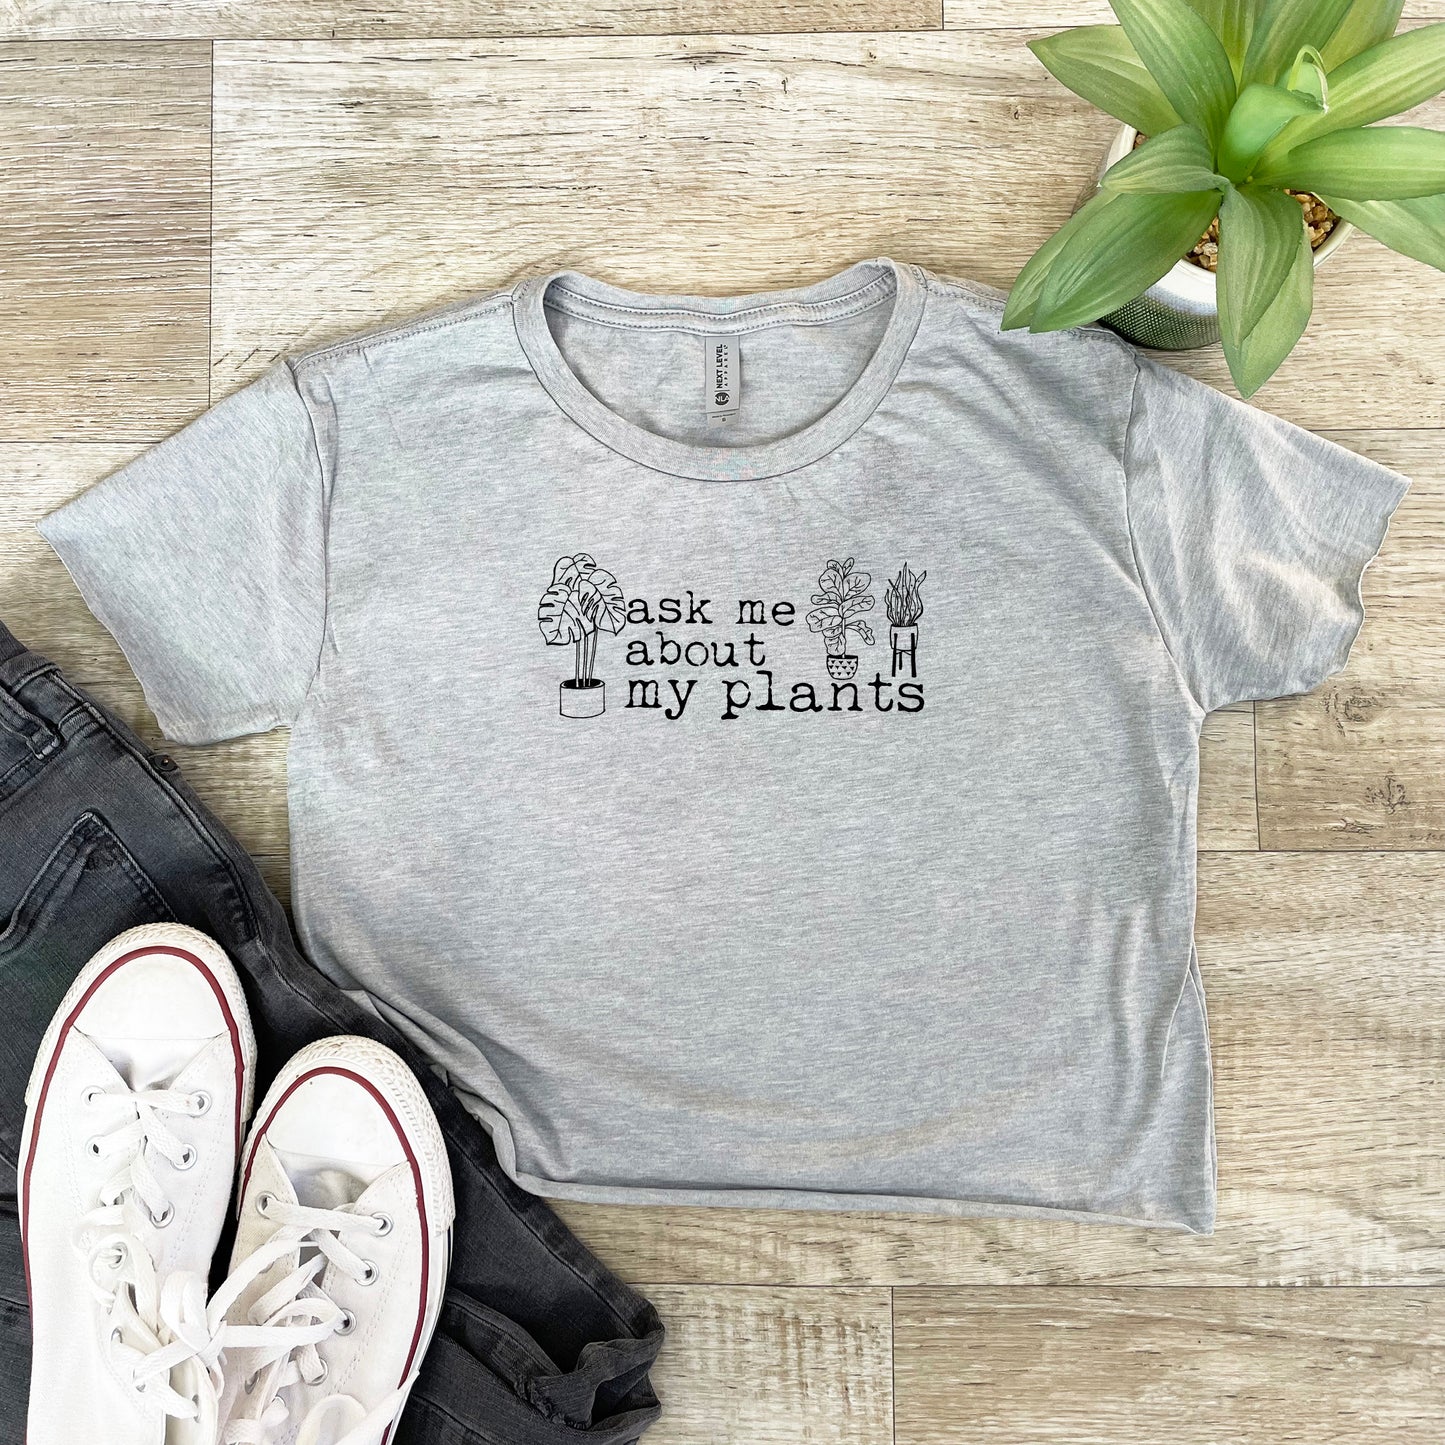 a t - shirt that says ask me to plant my plants